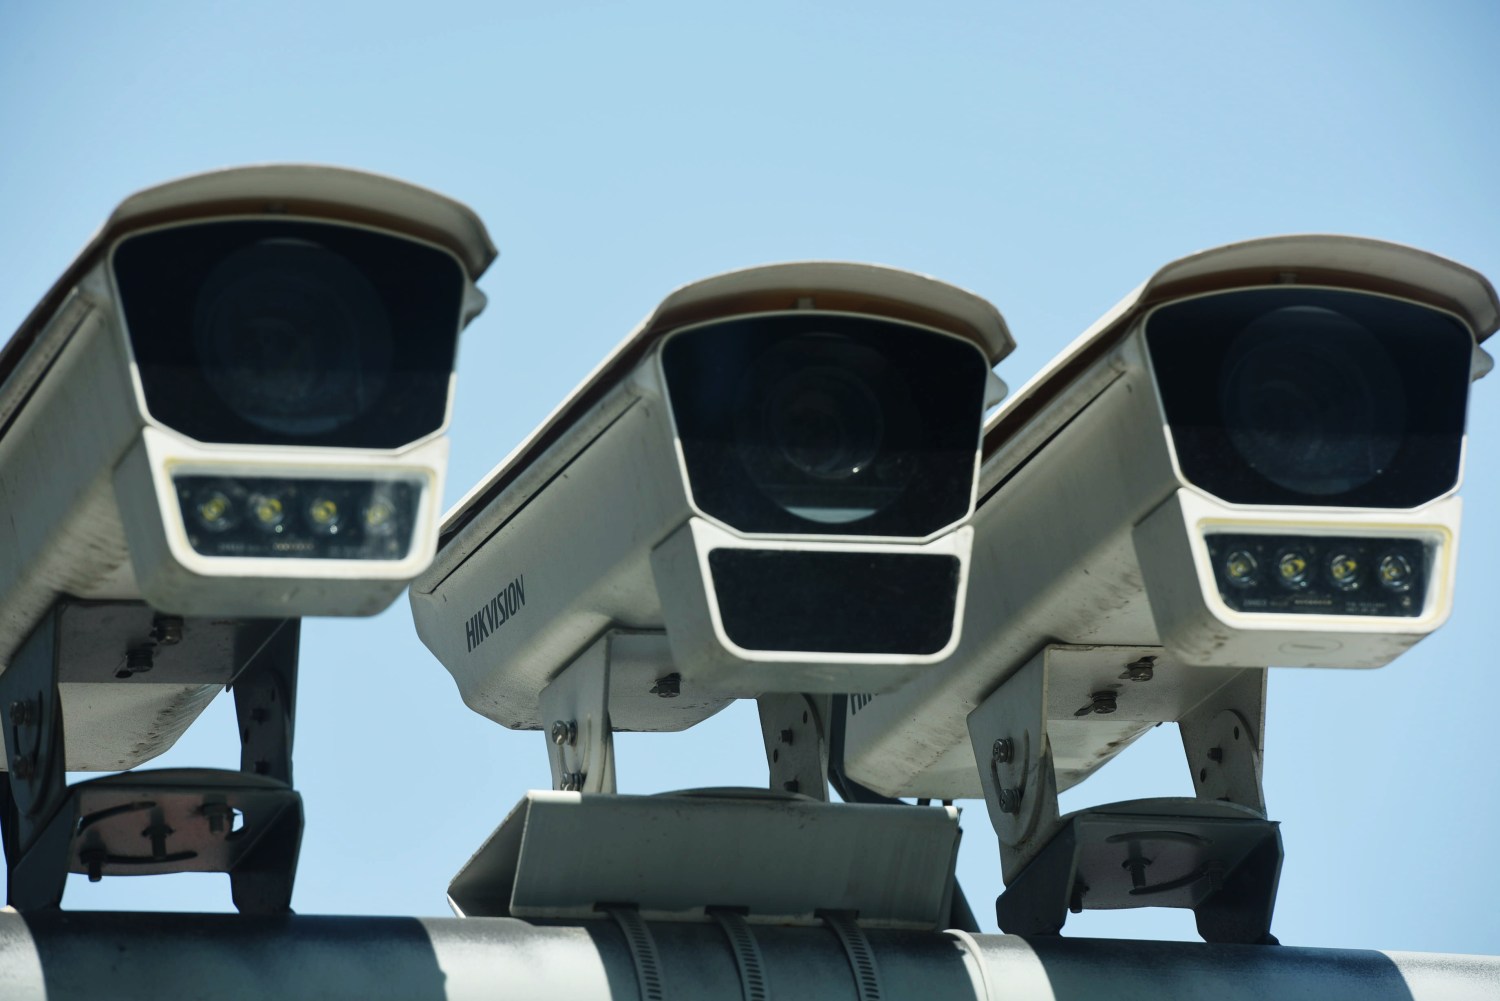 Surveillance cameras are seen at the headquarters of China's Hangzhou Hikvision Digital Technology Co Ltd in Hangzhou city, east China's Zhejiang province, 22 May 2019.China's Hangzhou Hikvision Digital Technology Co Ltd takes cybersecurity seriously and abides by applicable laws and rules wherever it operates, the China Daily newspaper quoted the company on Thursday as saying. No Use China. No Use France.